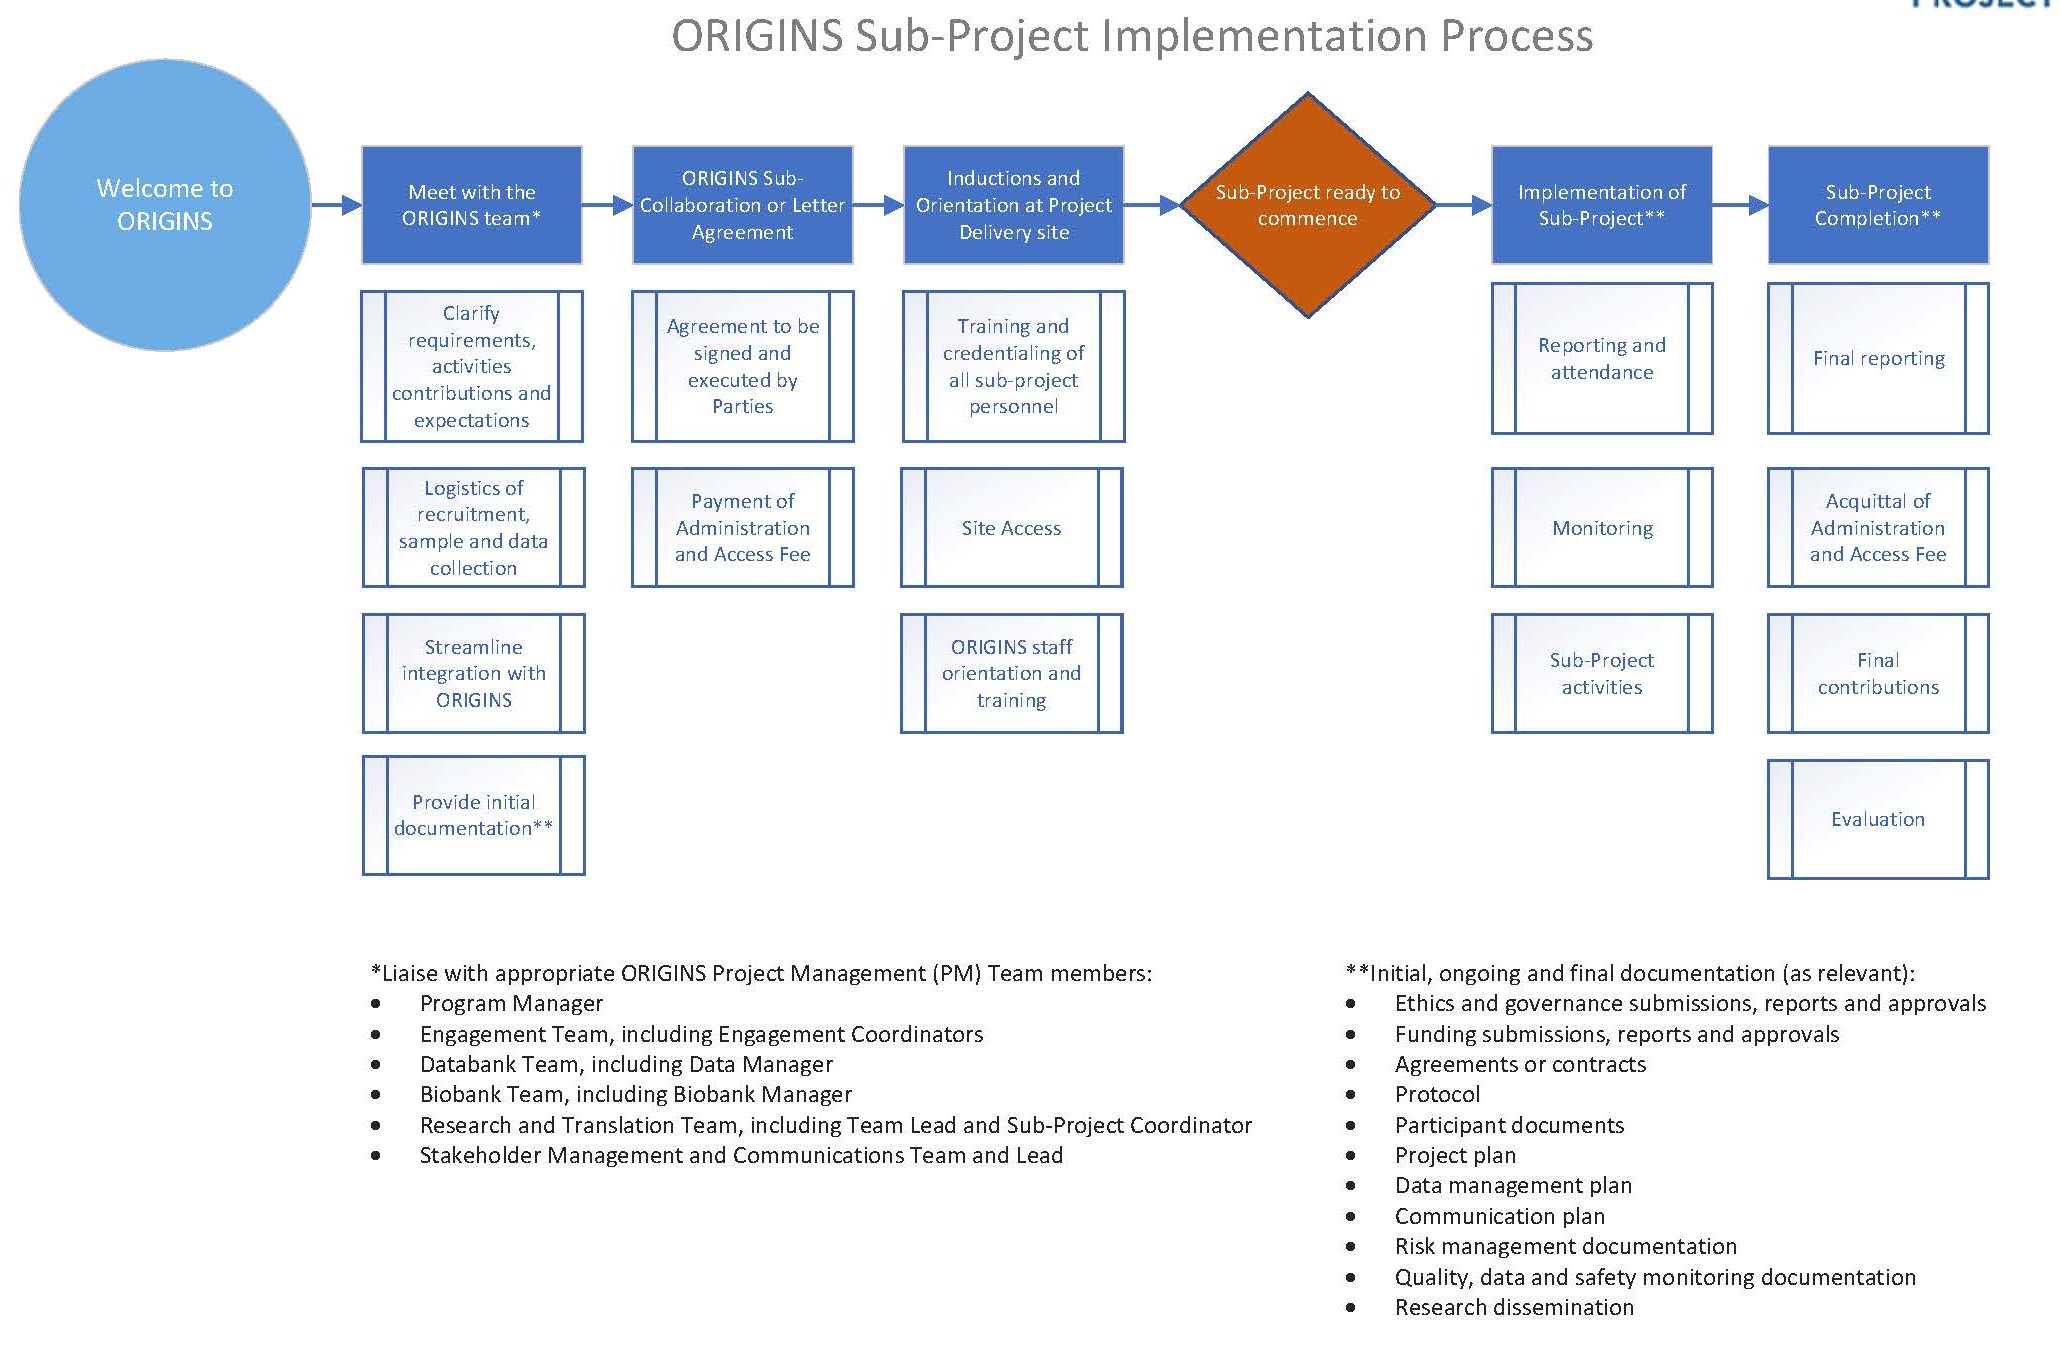 Sub-project implementation process 20201119.jpg